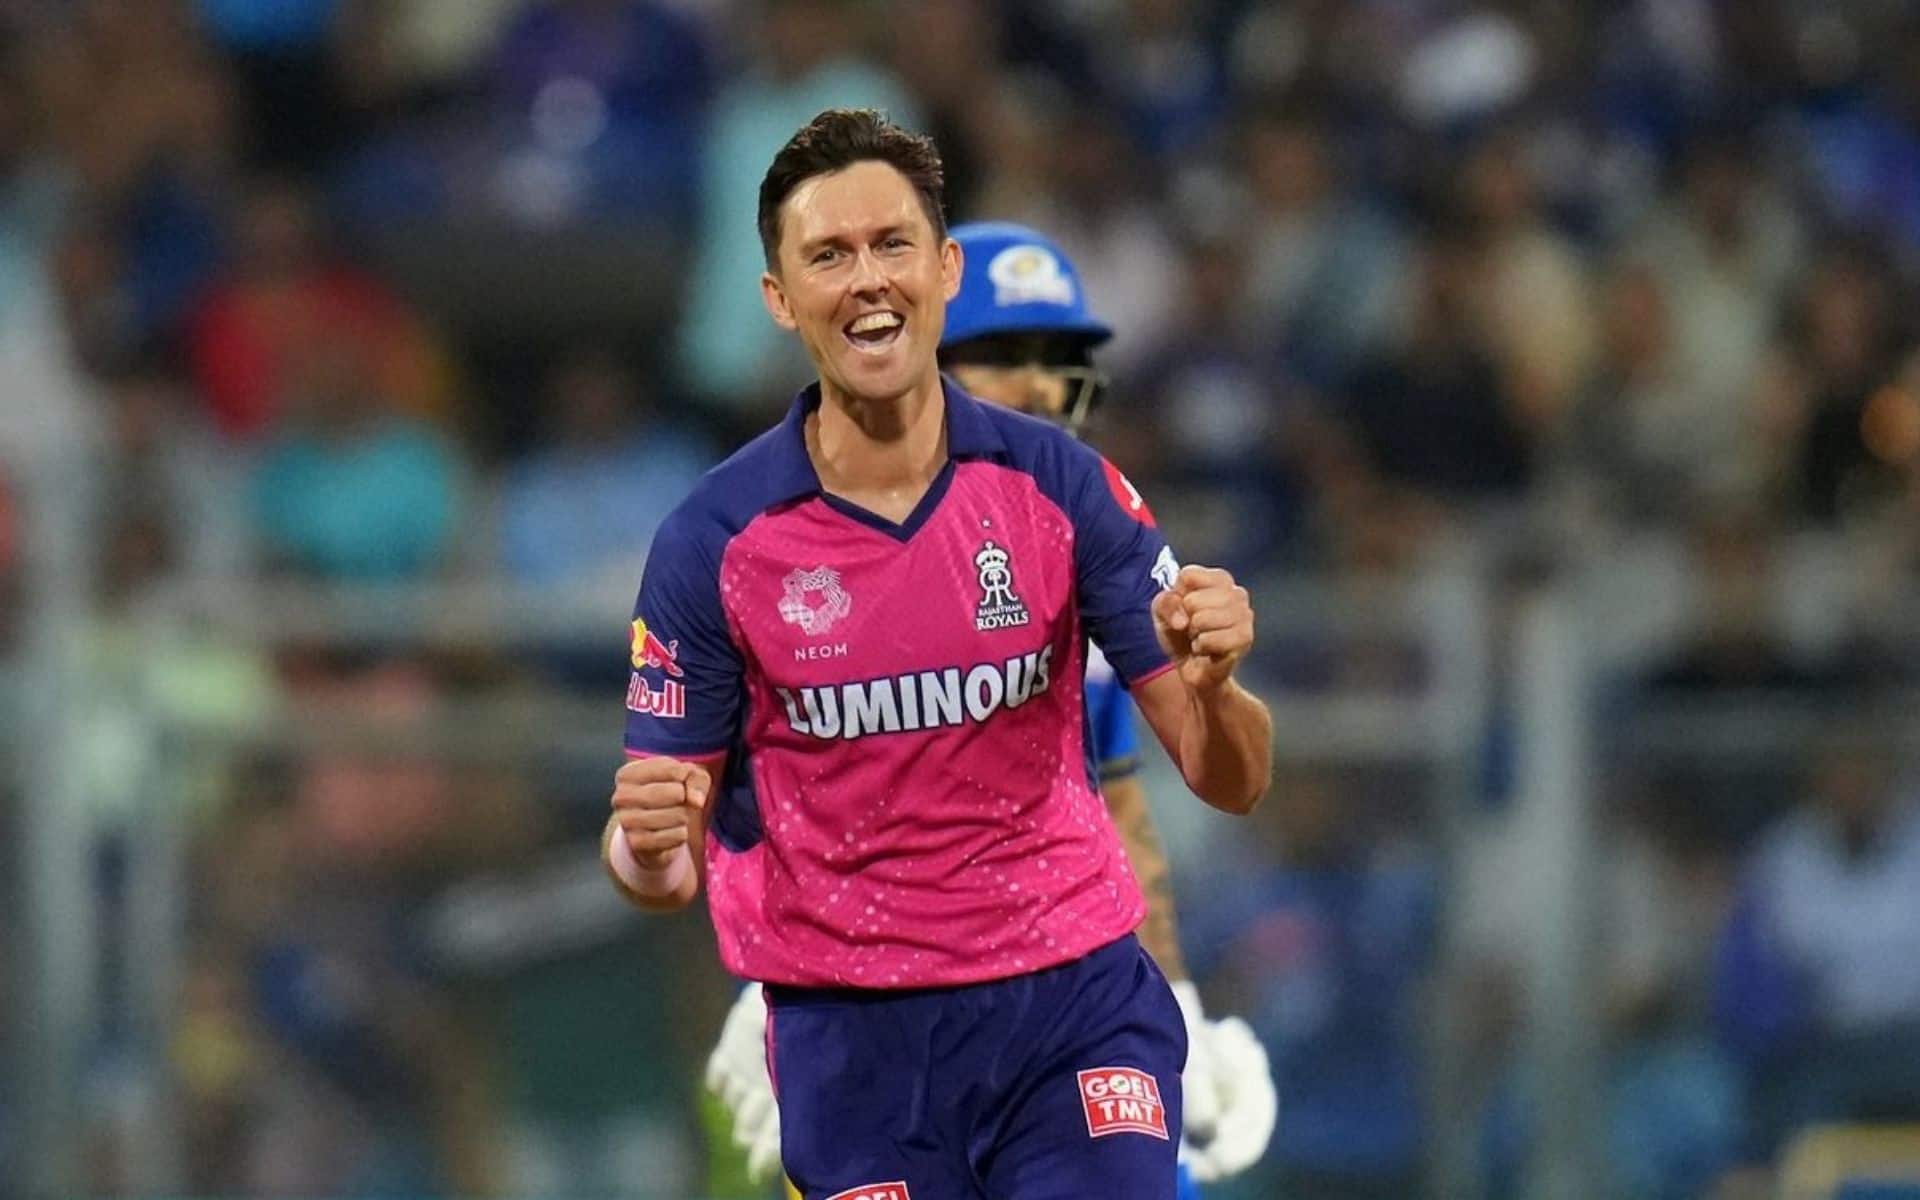 Trent Boult has the most wickets in the first over since IPL 2020 (X.com)